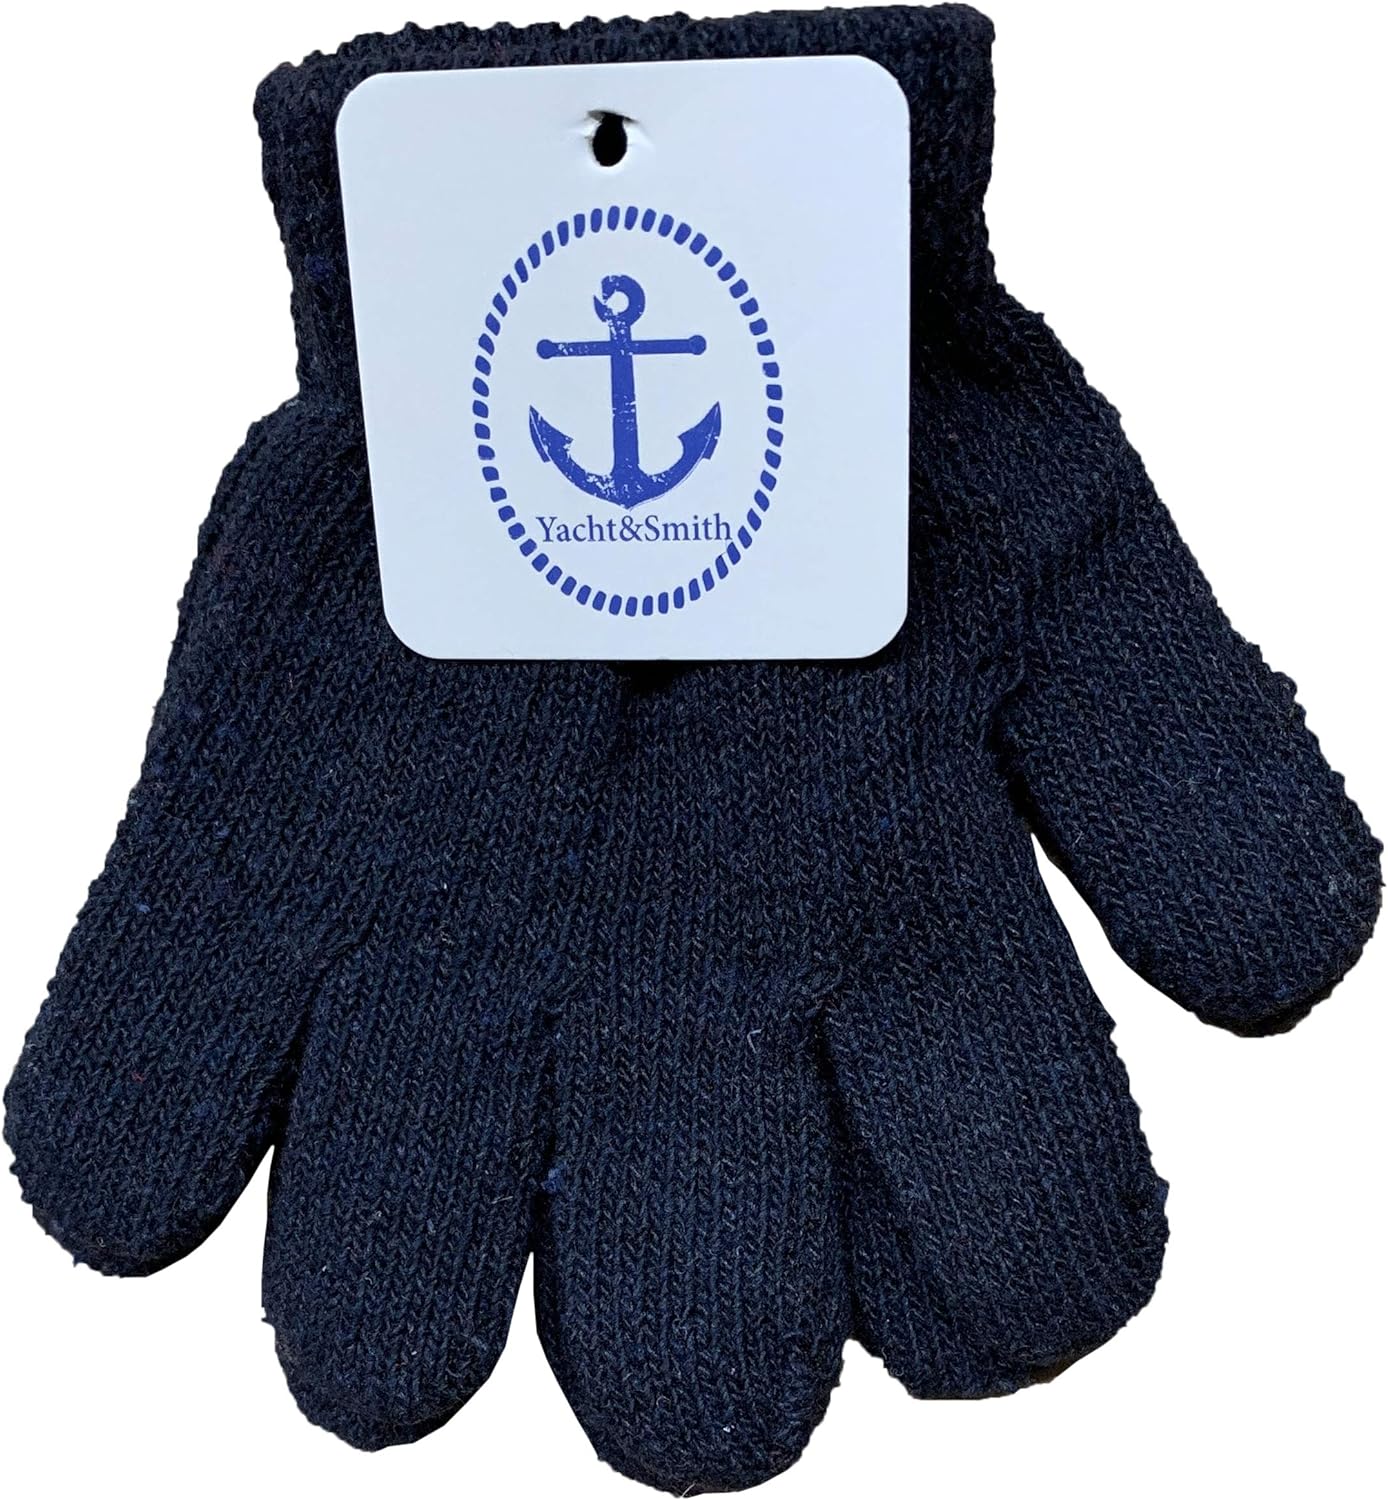 Yacht & Smith Kids Warm Winter Colorful Magic Stretch Gloves And Mittens For 2-5 Age Kids (12 Pairs Assorted)